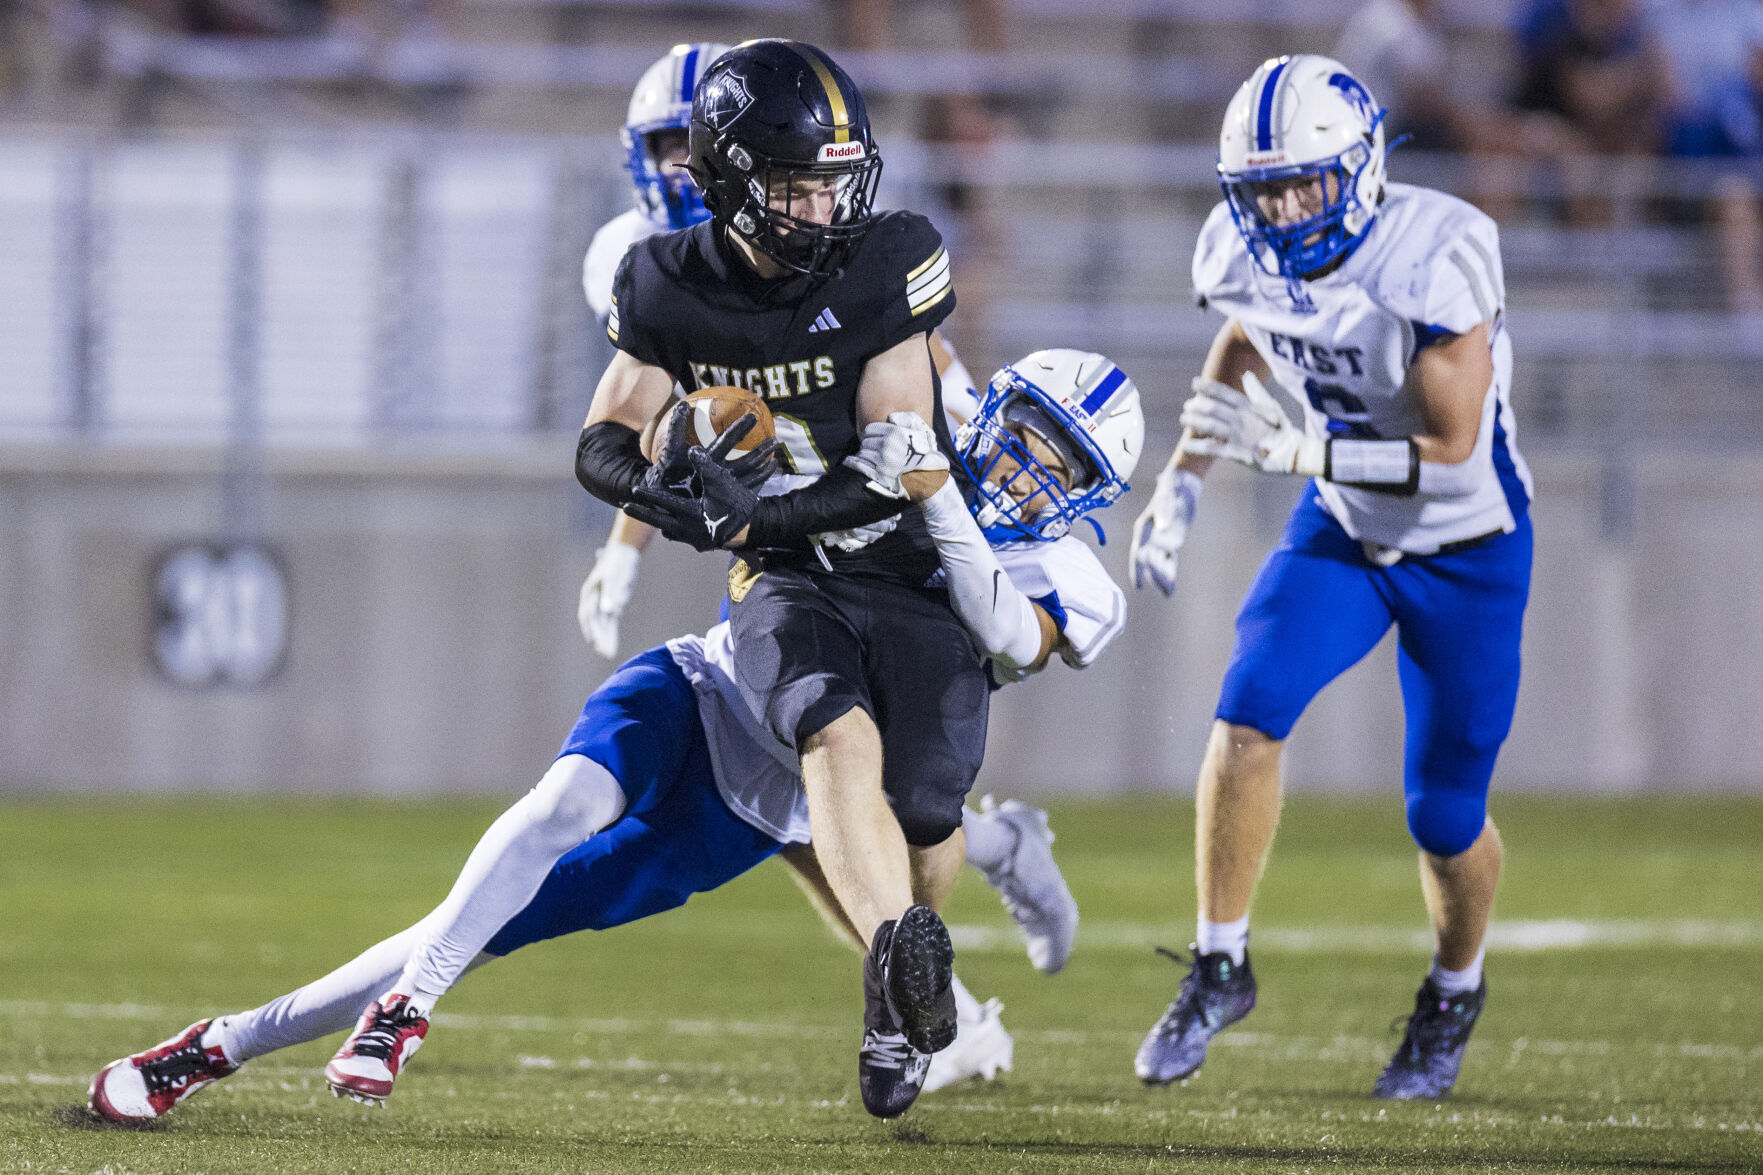 Week 3 High School Football Predictions: Omaha Westside, Bennington, and Parkview Christian Expected to Prevail